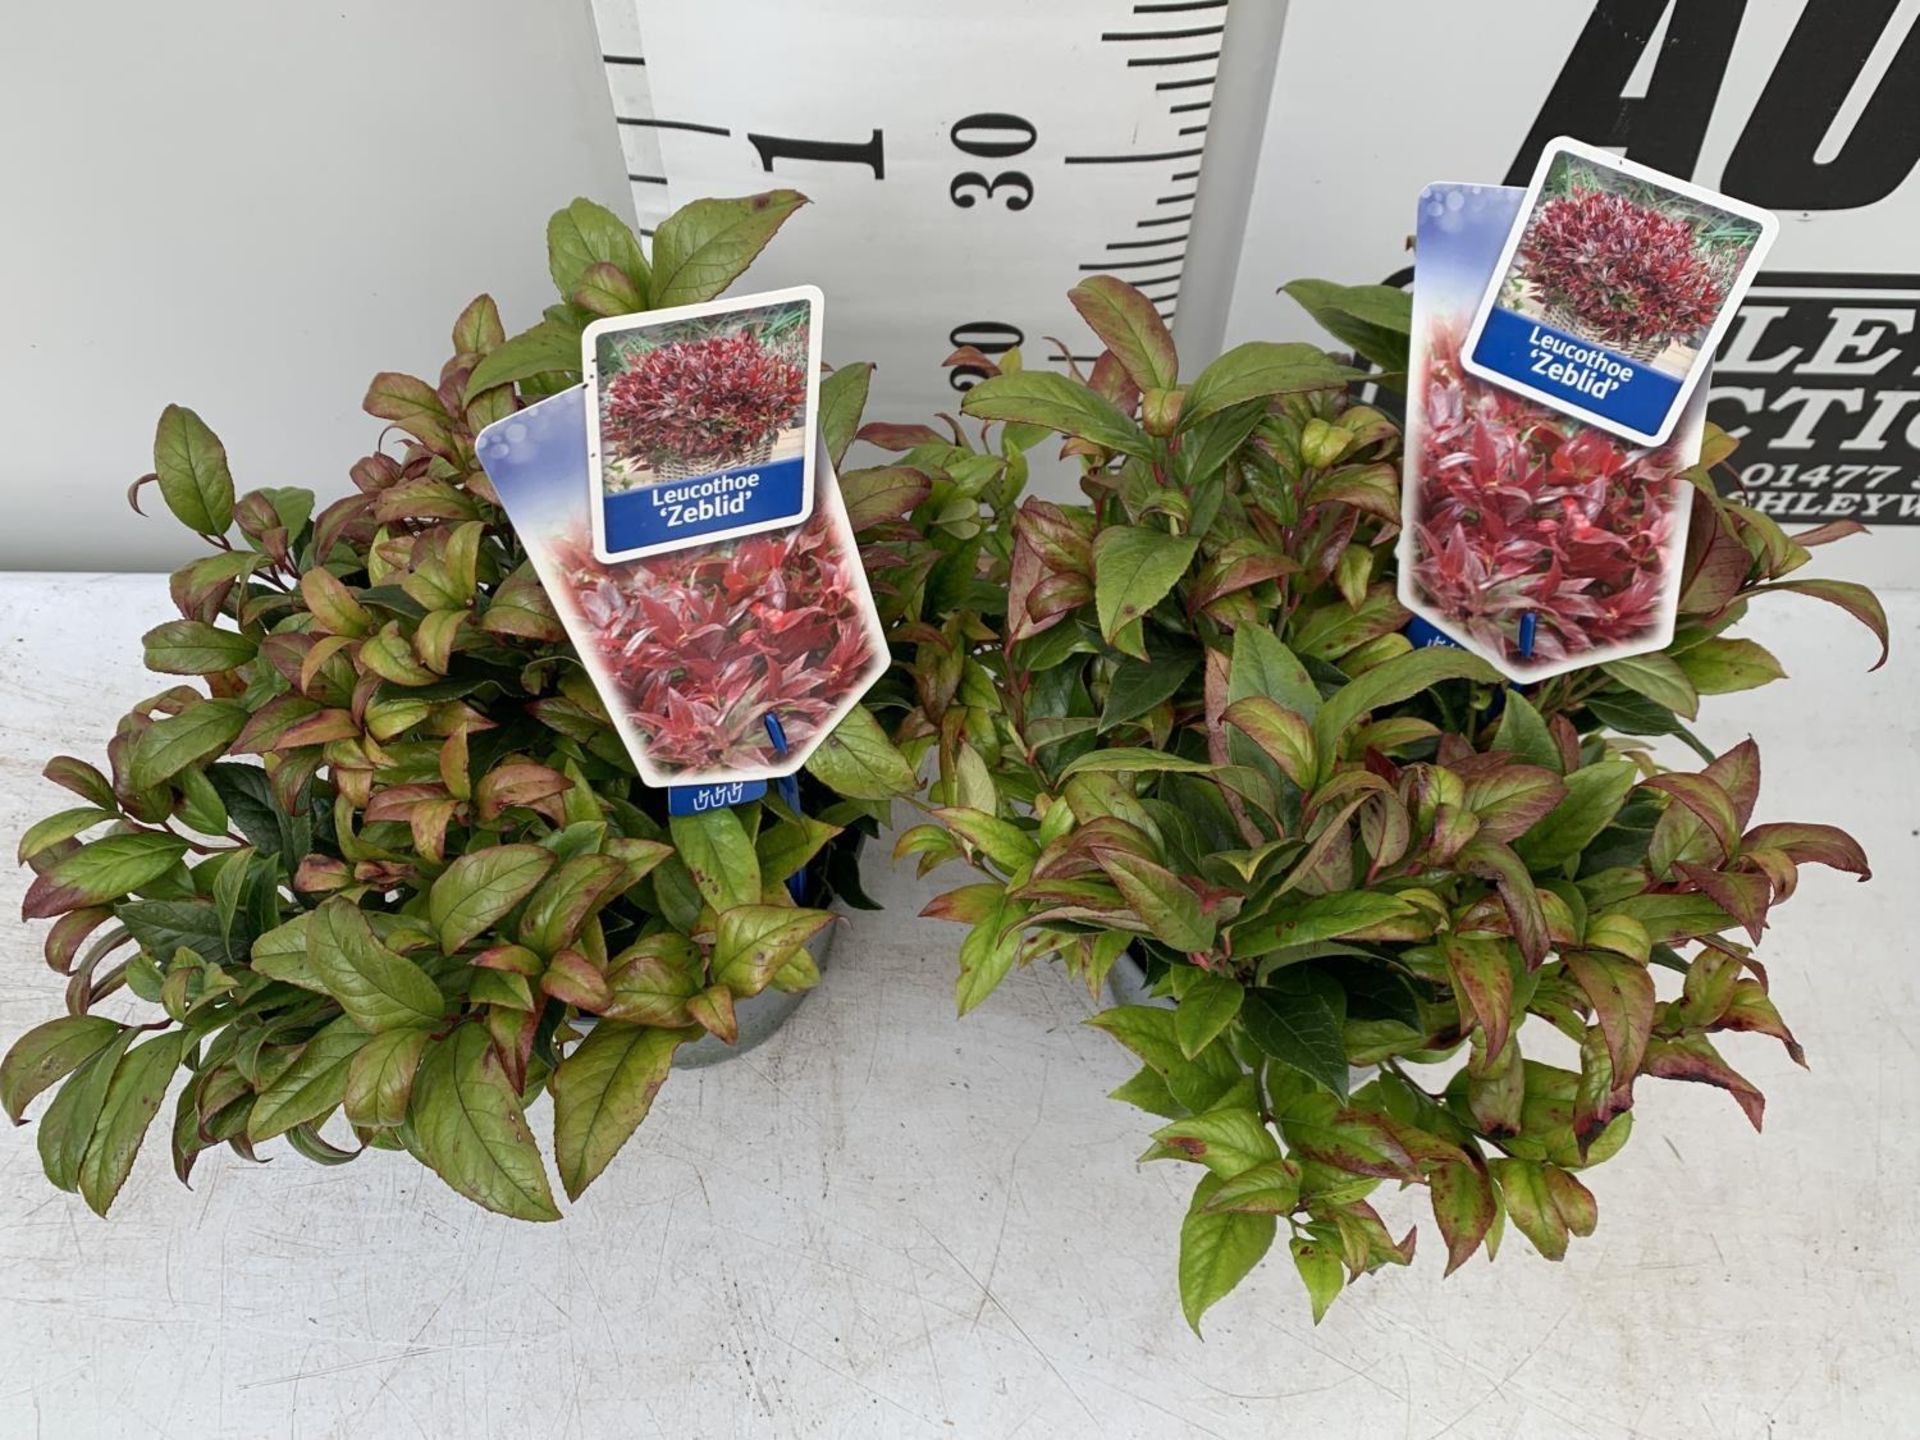 TWO LEUCOTHOE ZEBLID IN 2 LTR POTS 35CM TALL PLUS VAT TO BE SOLD FOR THE TWO - Bild 4 aus 8